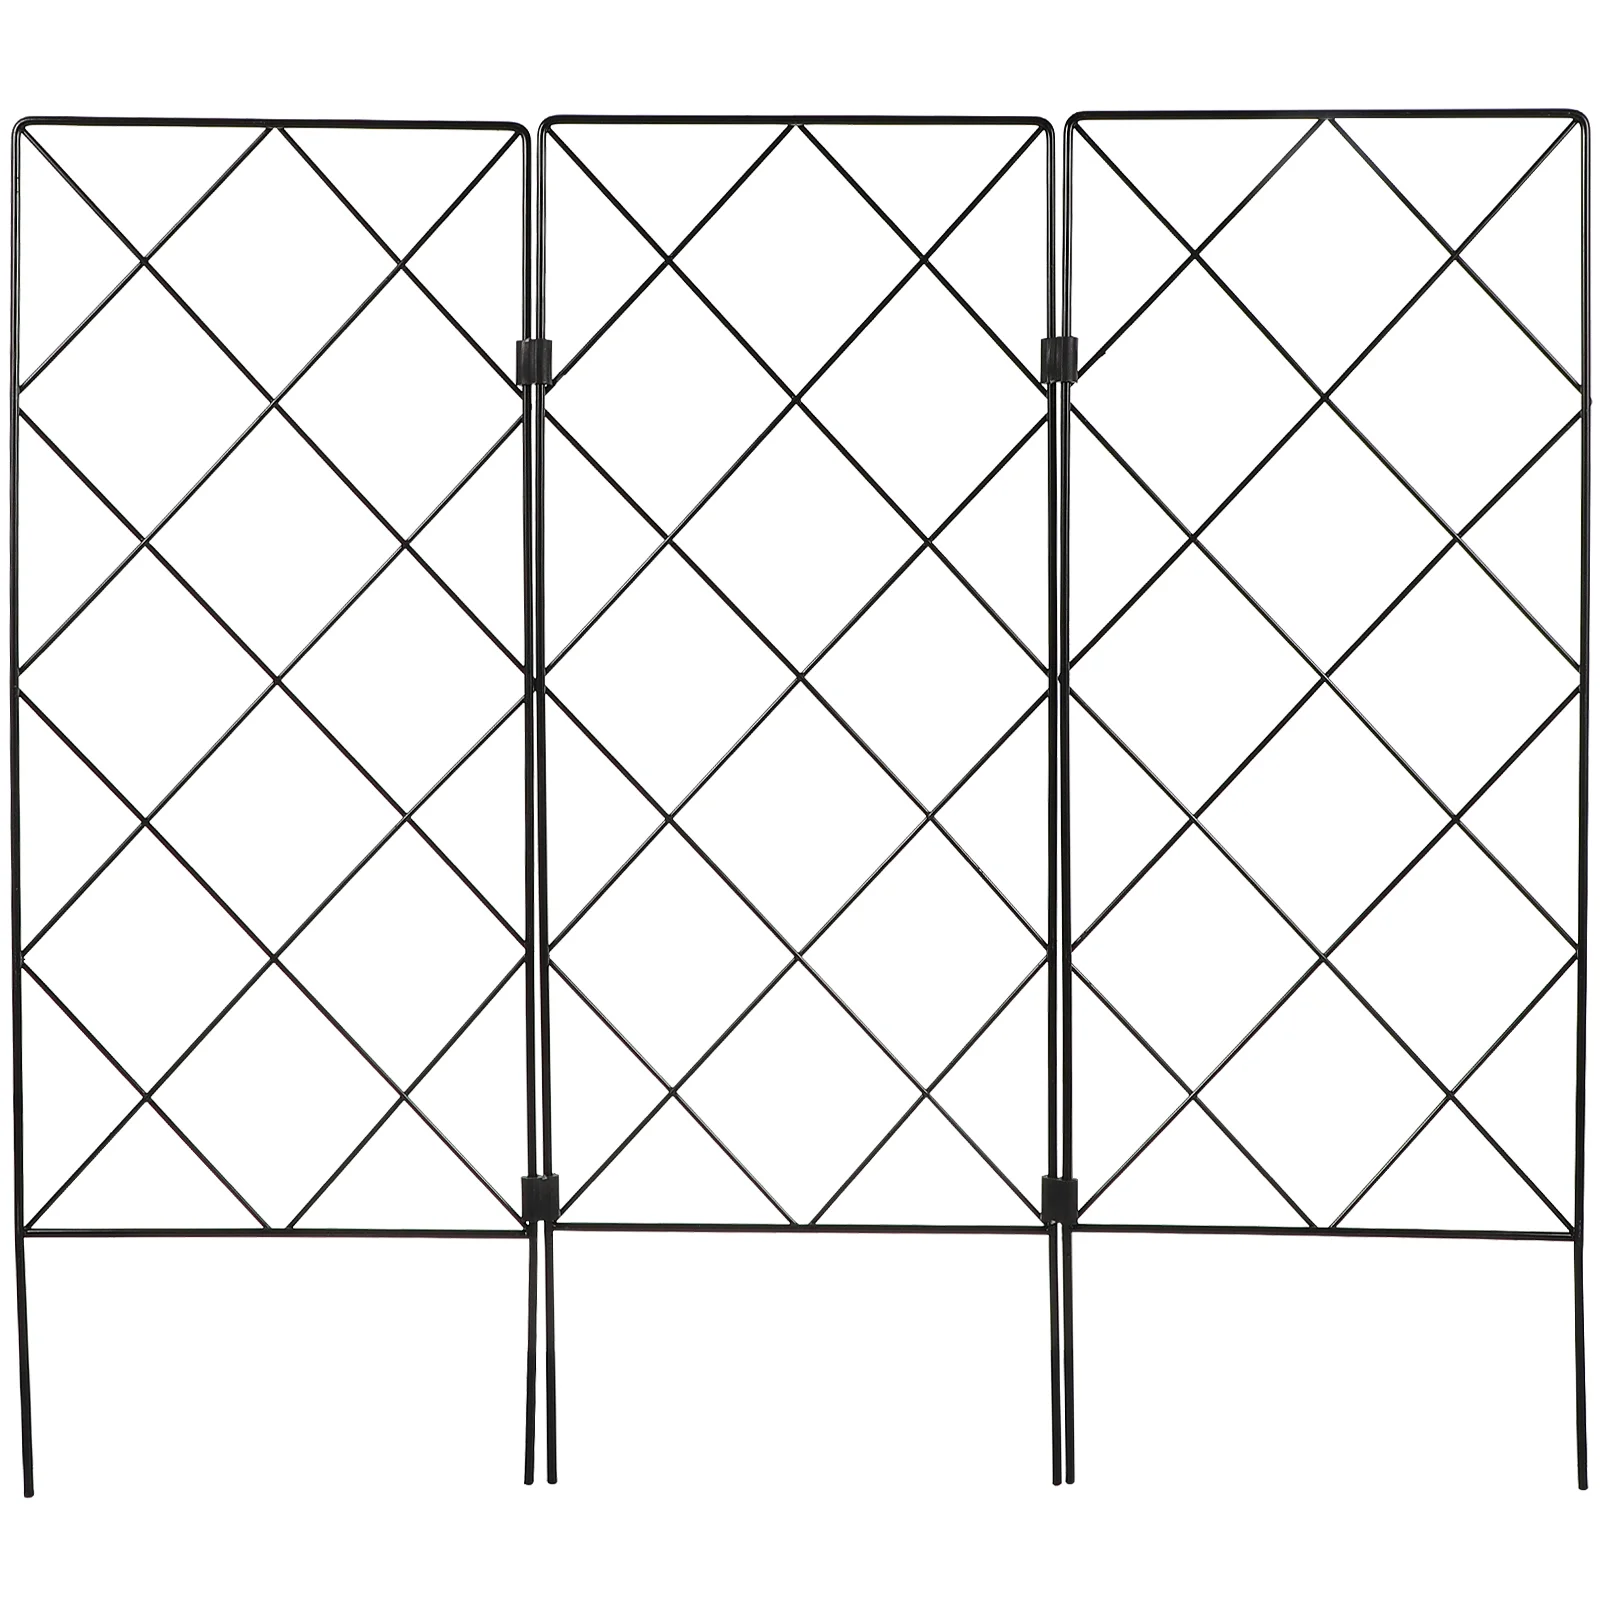 

Garden Trellis Support for Climbing: Foldable Potted Support Vines Flowers Stands Trellis Wire Lattices Grid Panels for Grape